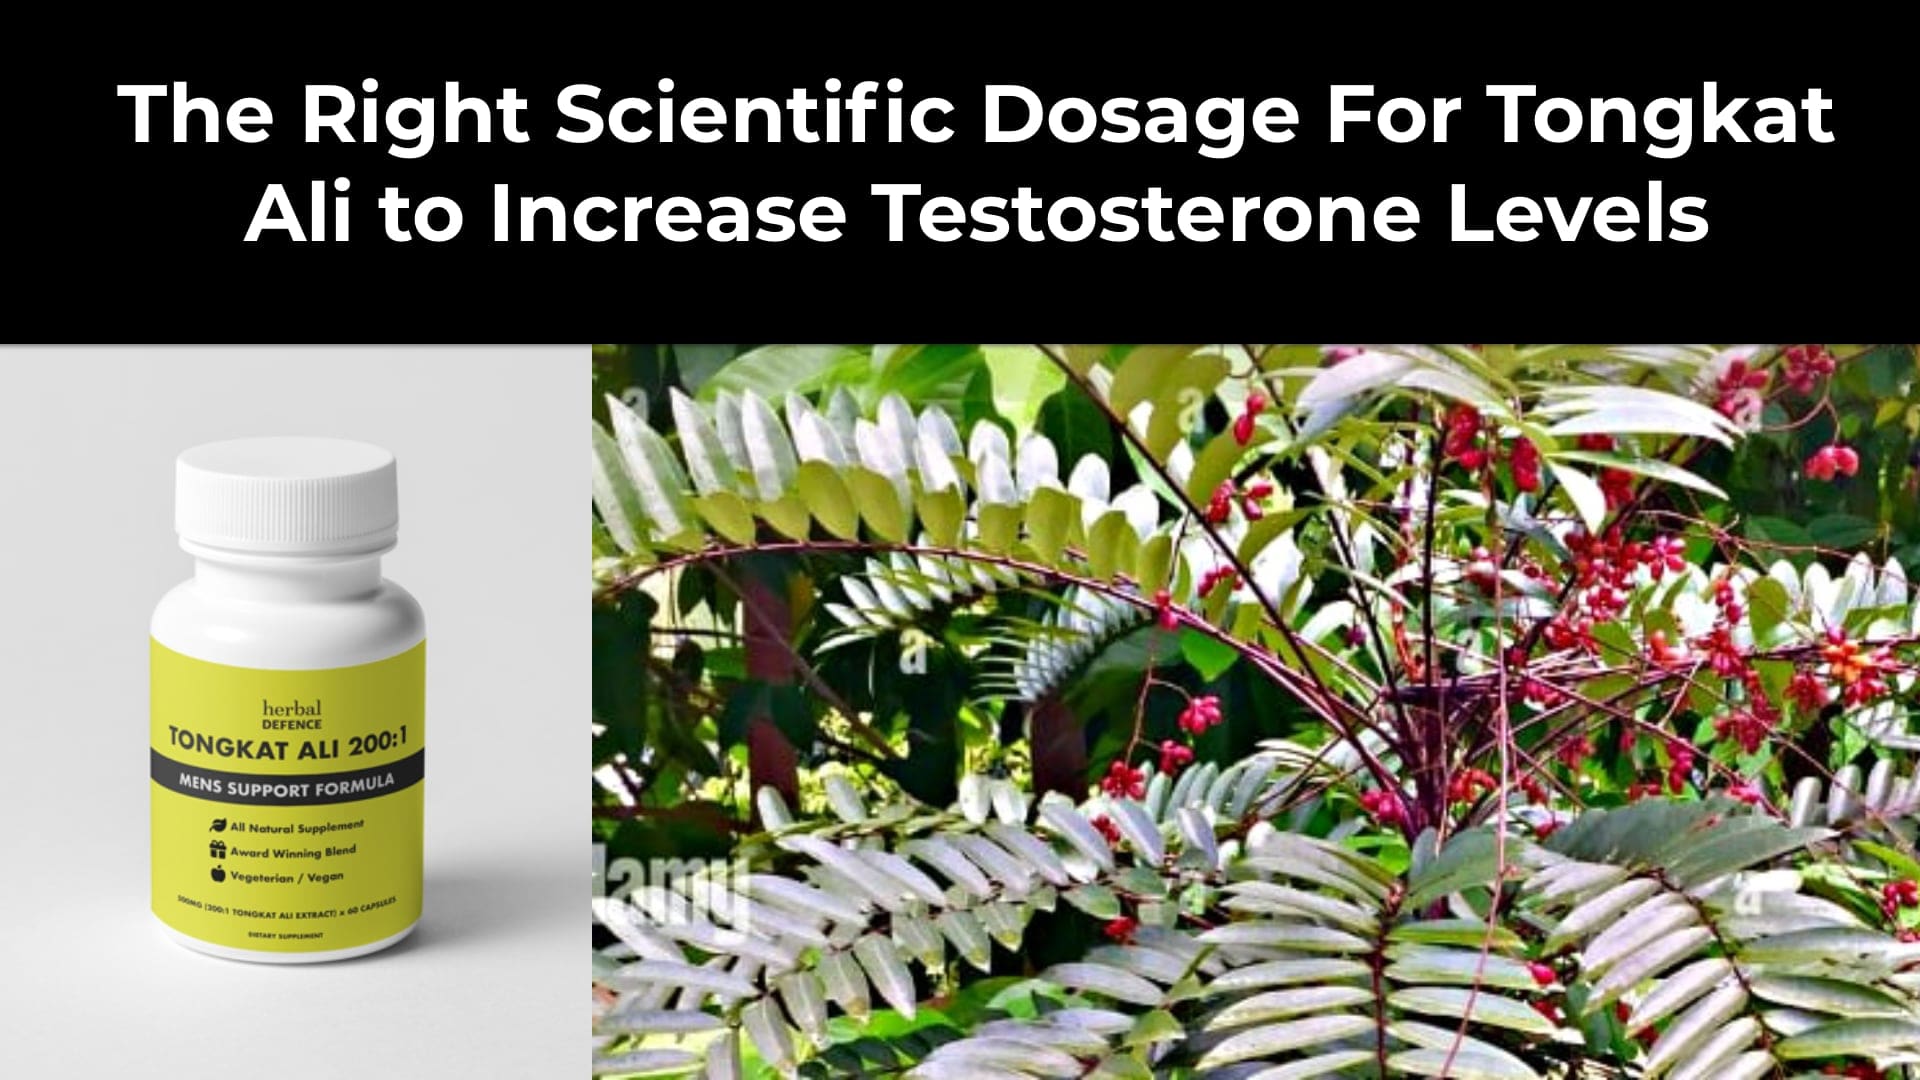 The Right Scientific Dosage For Tongkat Ali to Increase Testosterone Levels